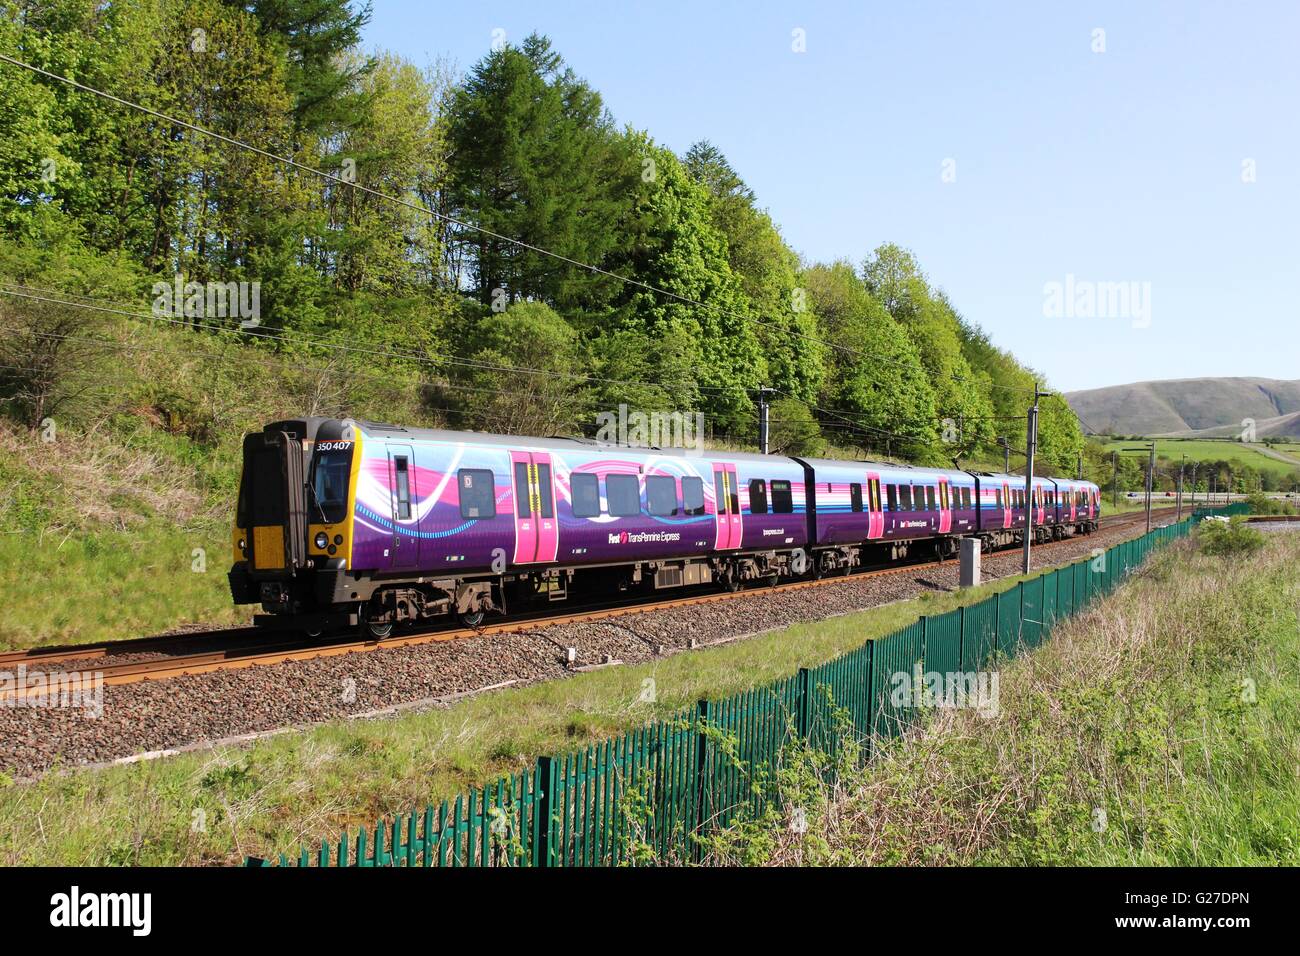 Class 350 Desiro electric multiple unit train in First TransPennine Express livery on West Coast Main Line near Beckfoot Cumbria Stock Photo